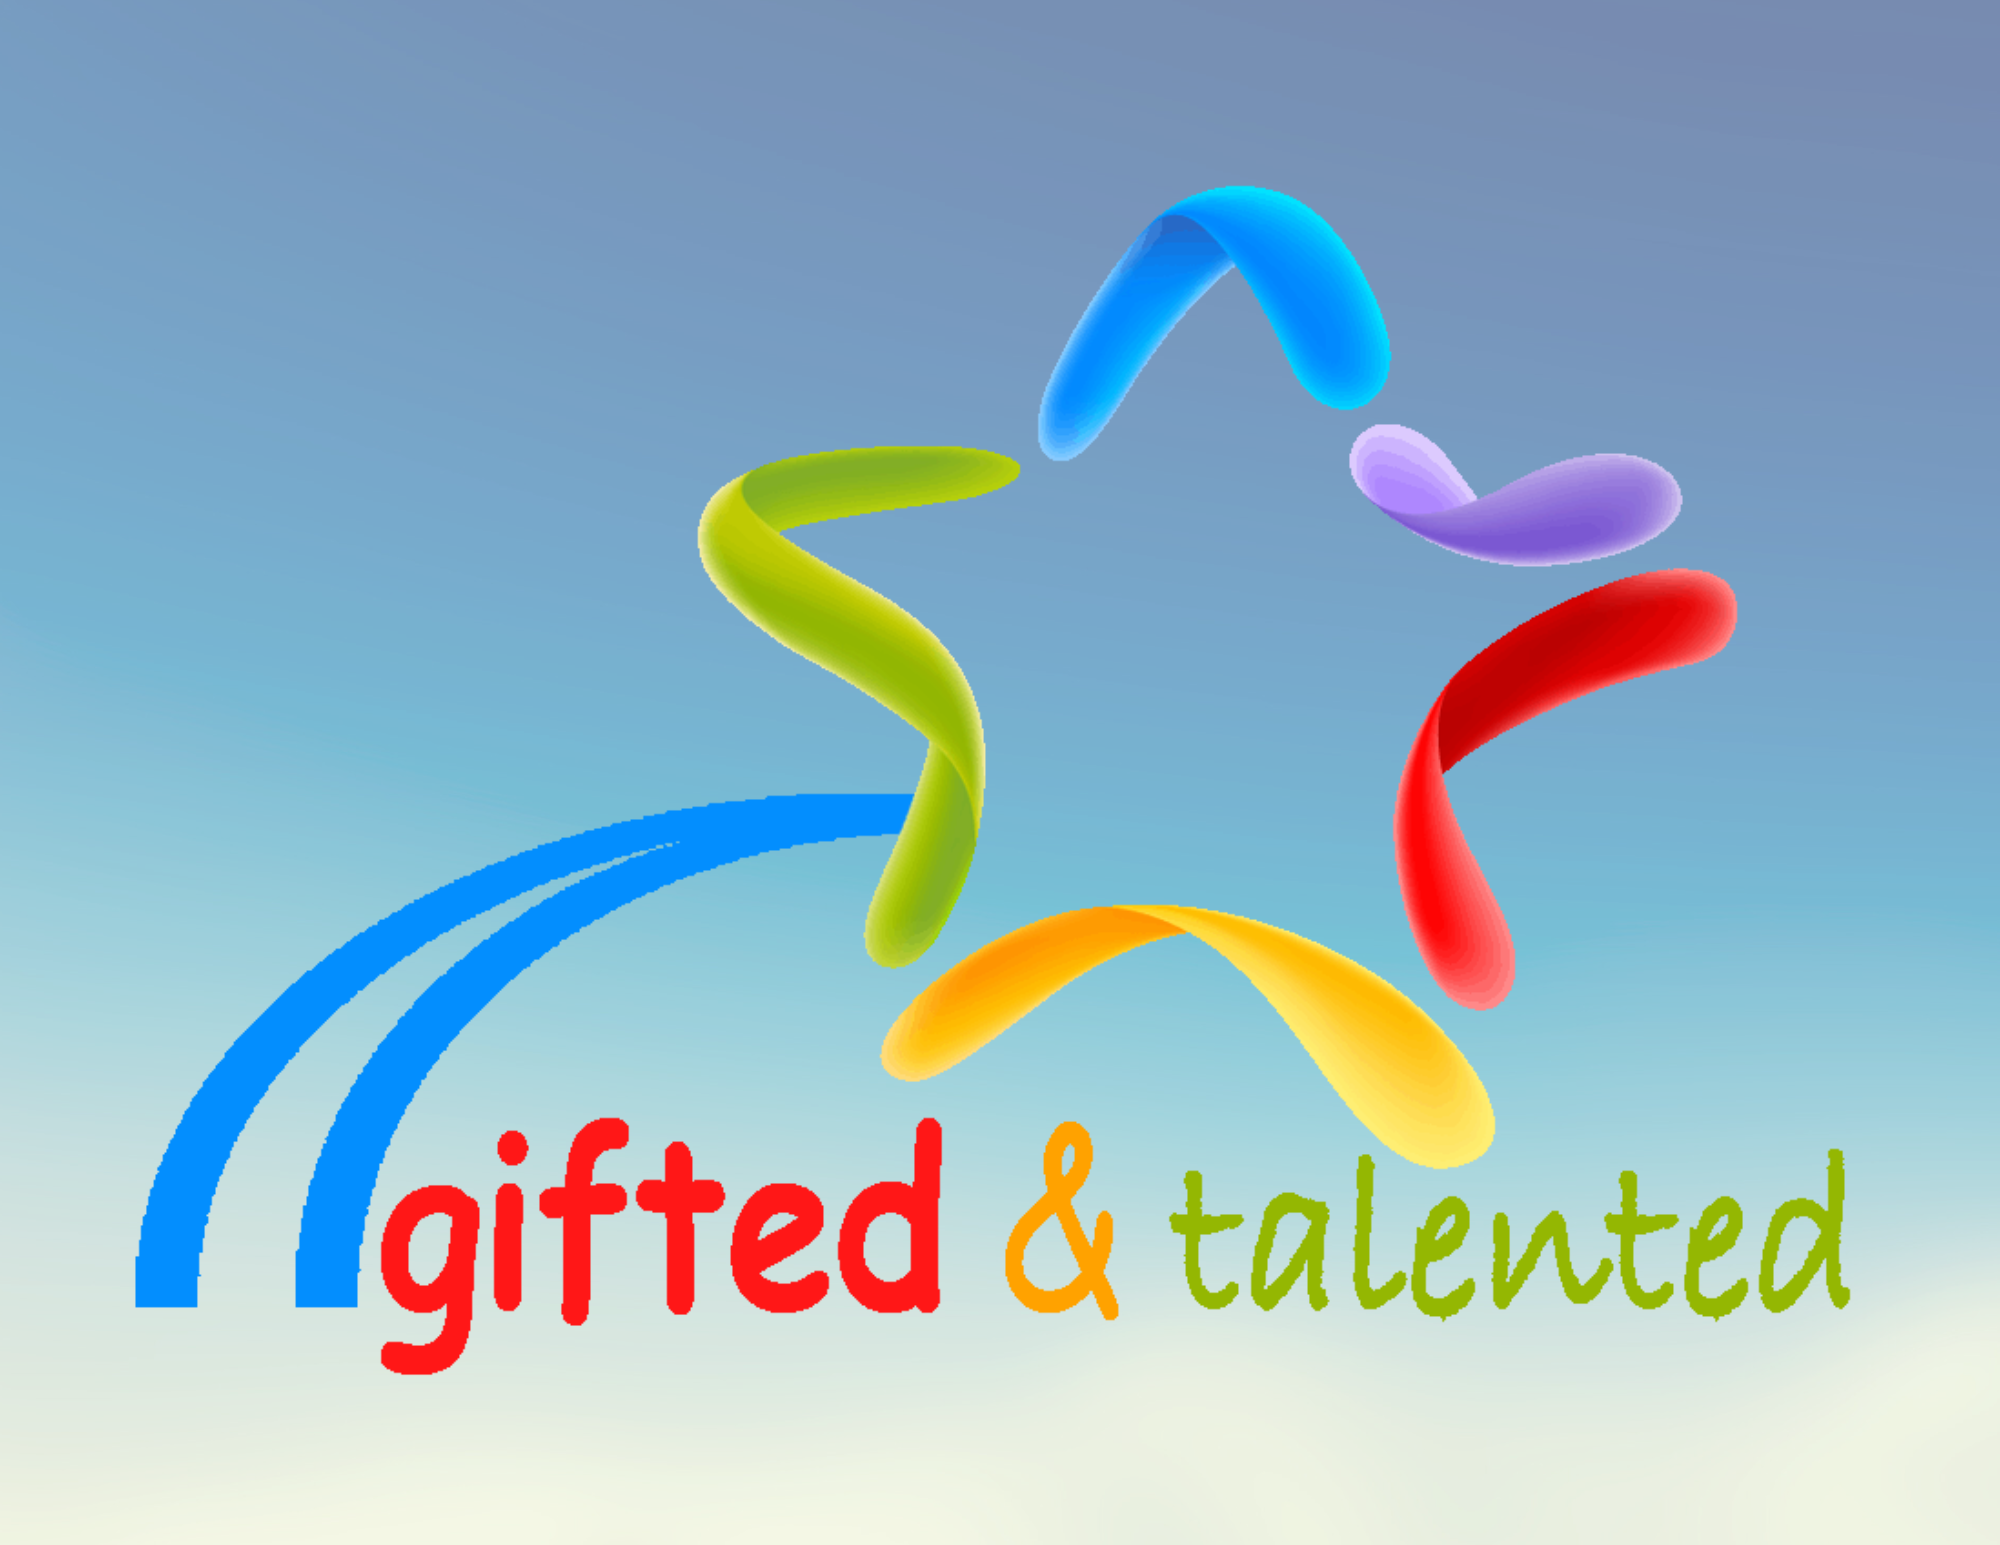 Gifted and talented